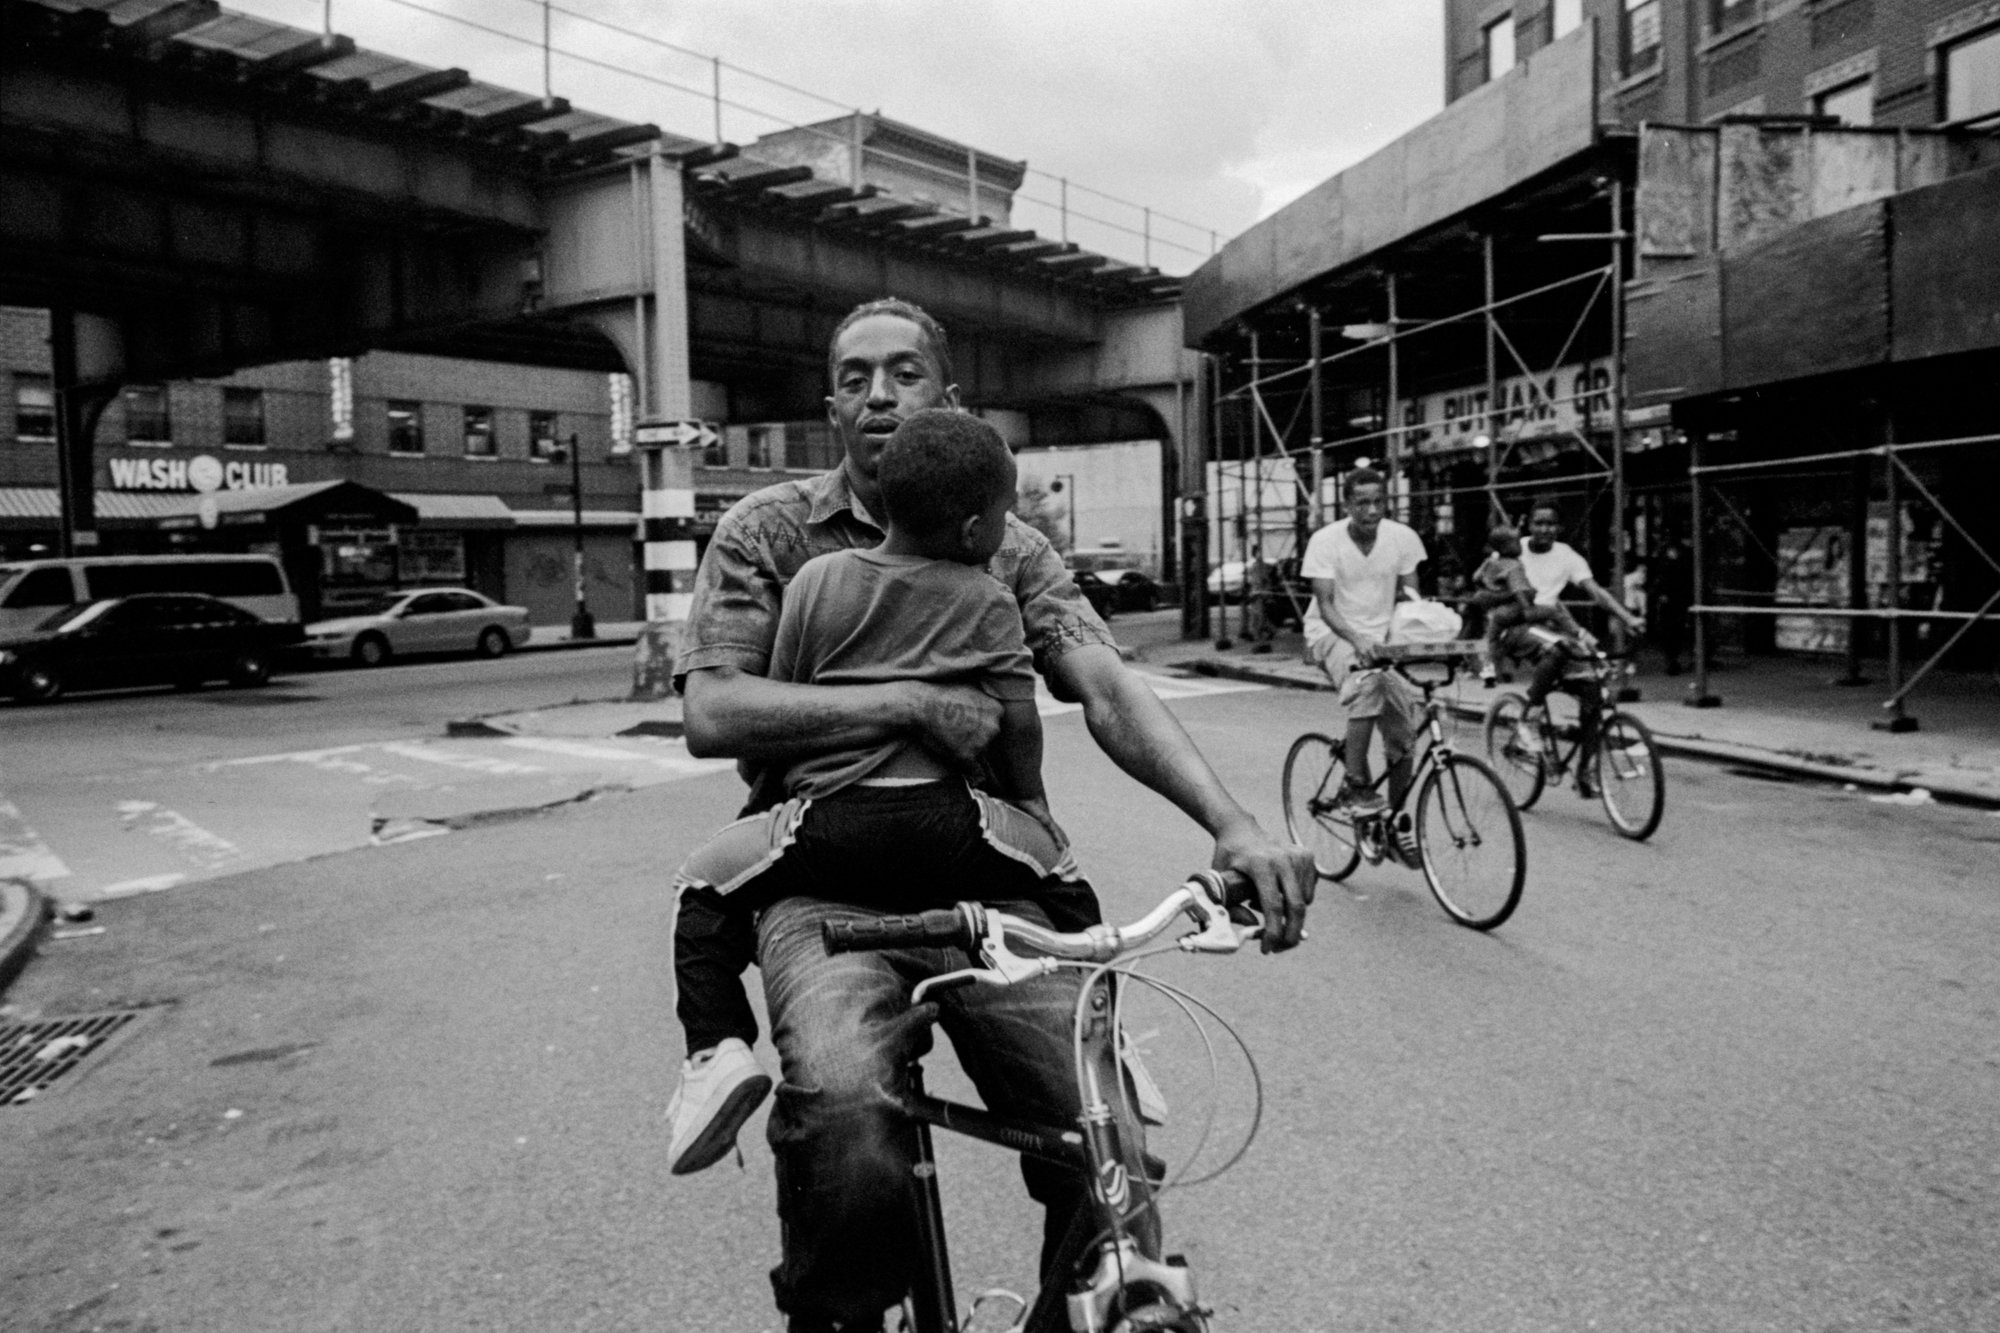 Black and white film photograph by Andre. D Wagner of a man holding a child while riding a bike in a city.